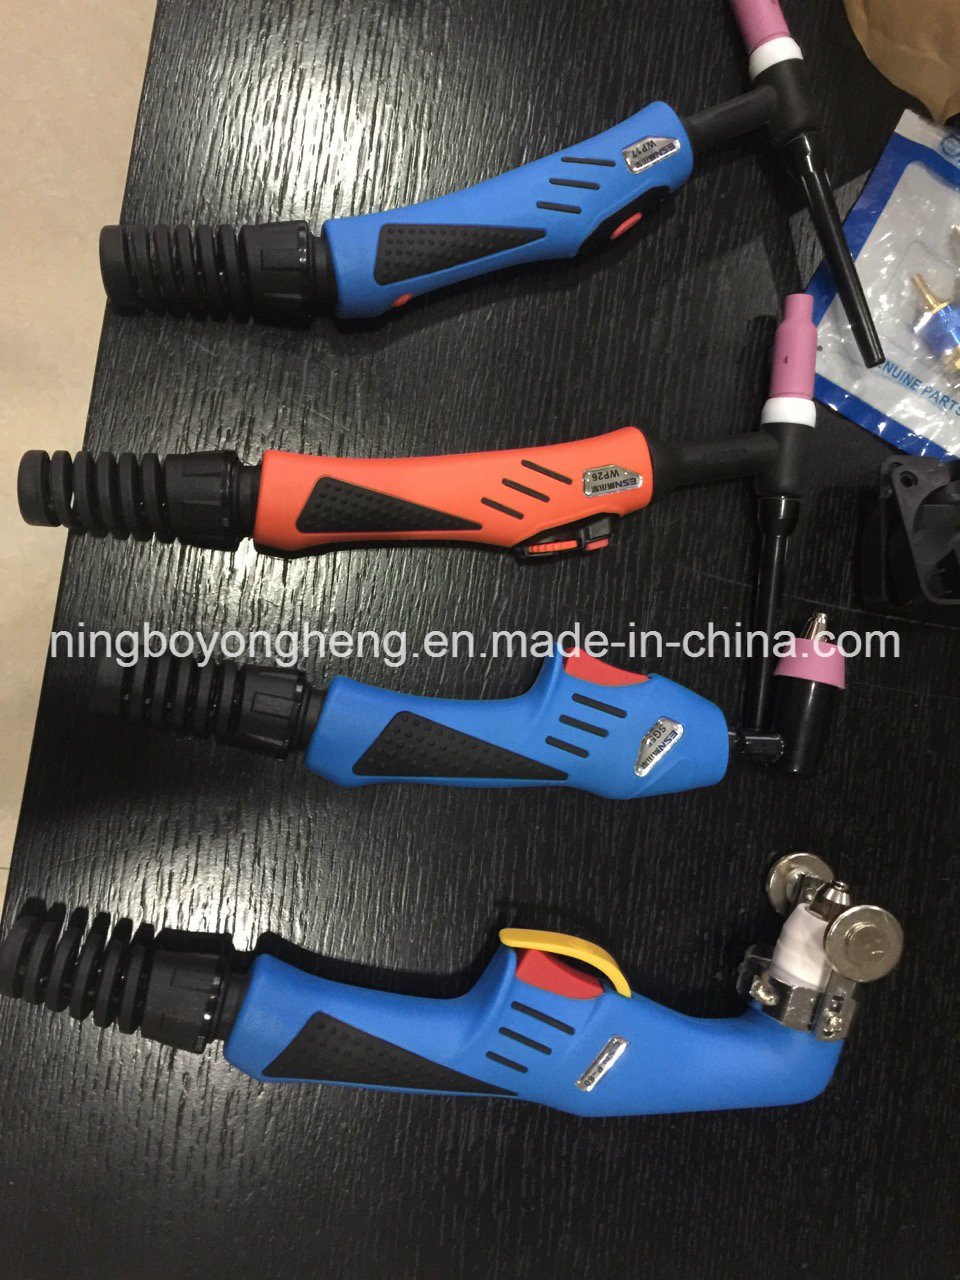 MB 401d/501d Water Cooled MIG/Mag Welding Torch